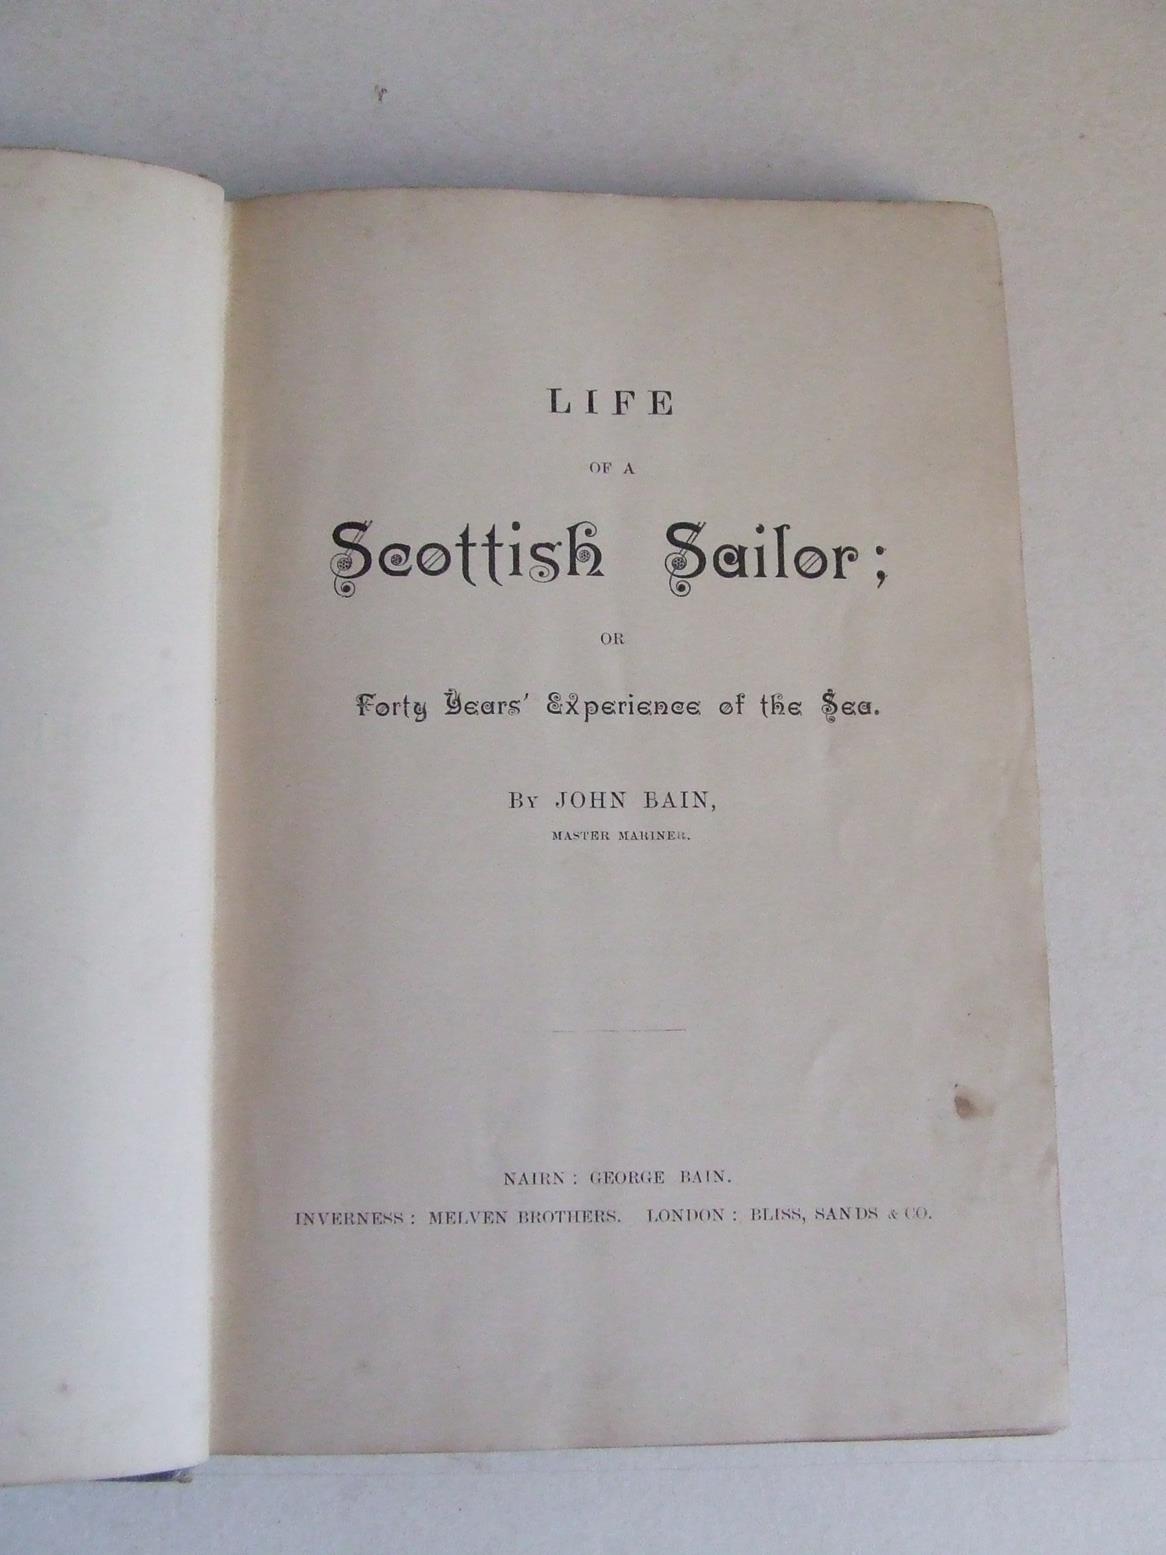 Life of a Scottish Sailor; or forty years experience of the sea